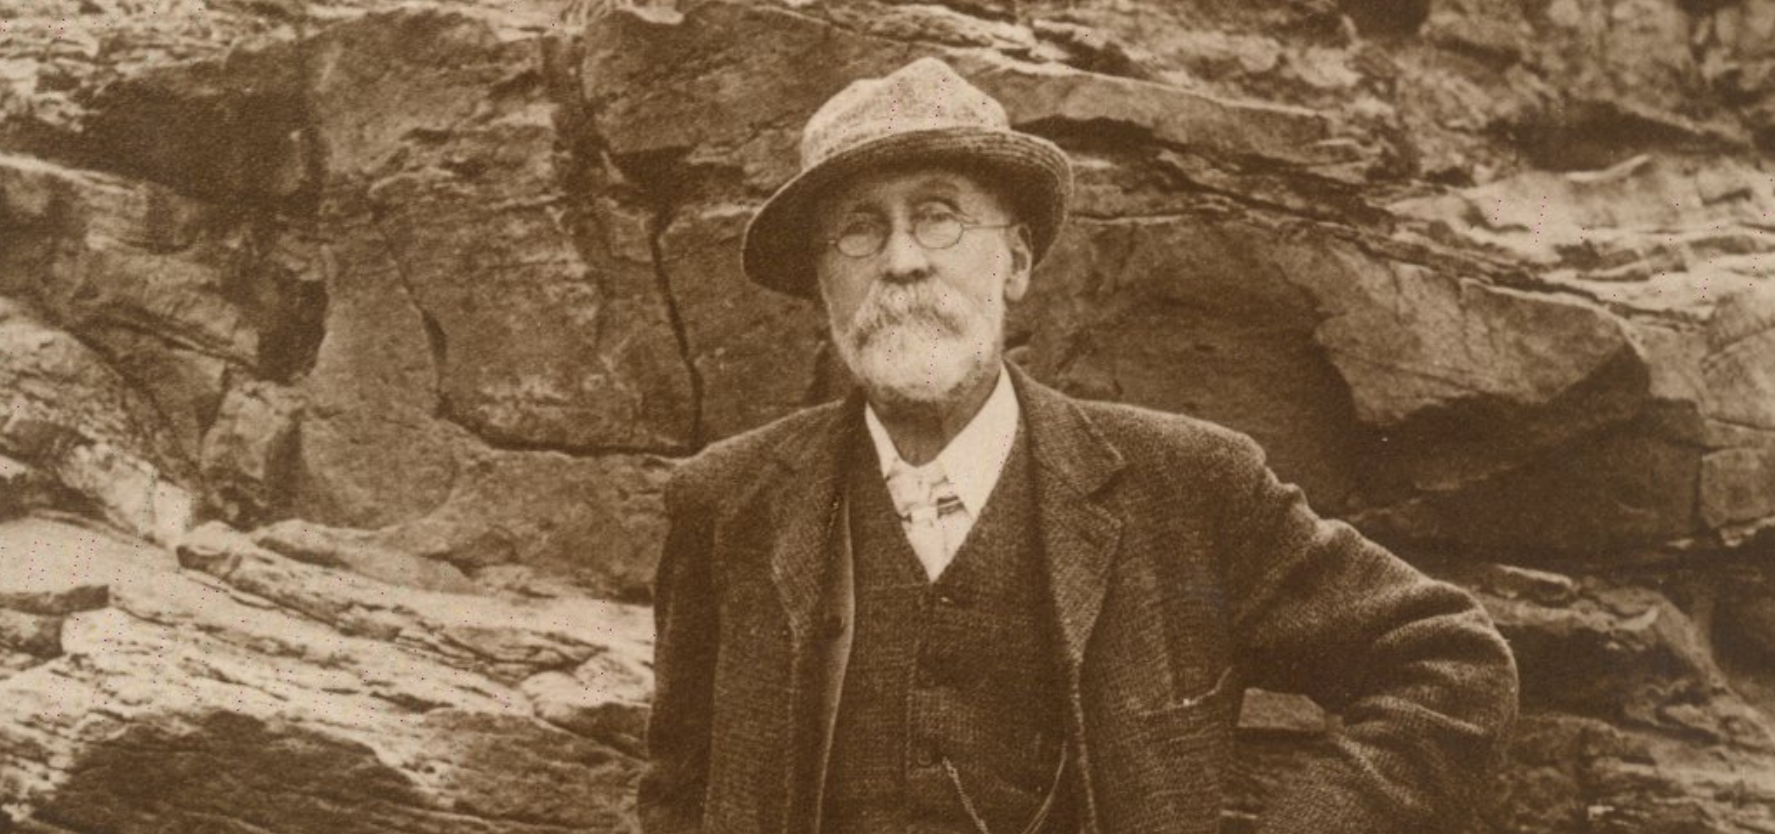 An image of Joseph Rowntree later in his life